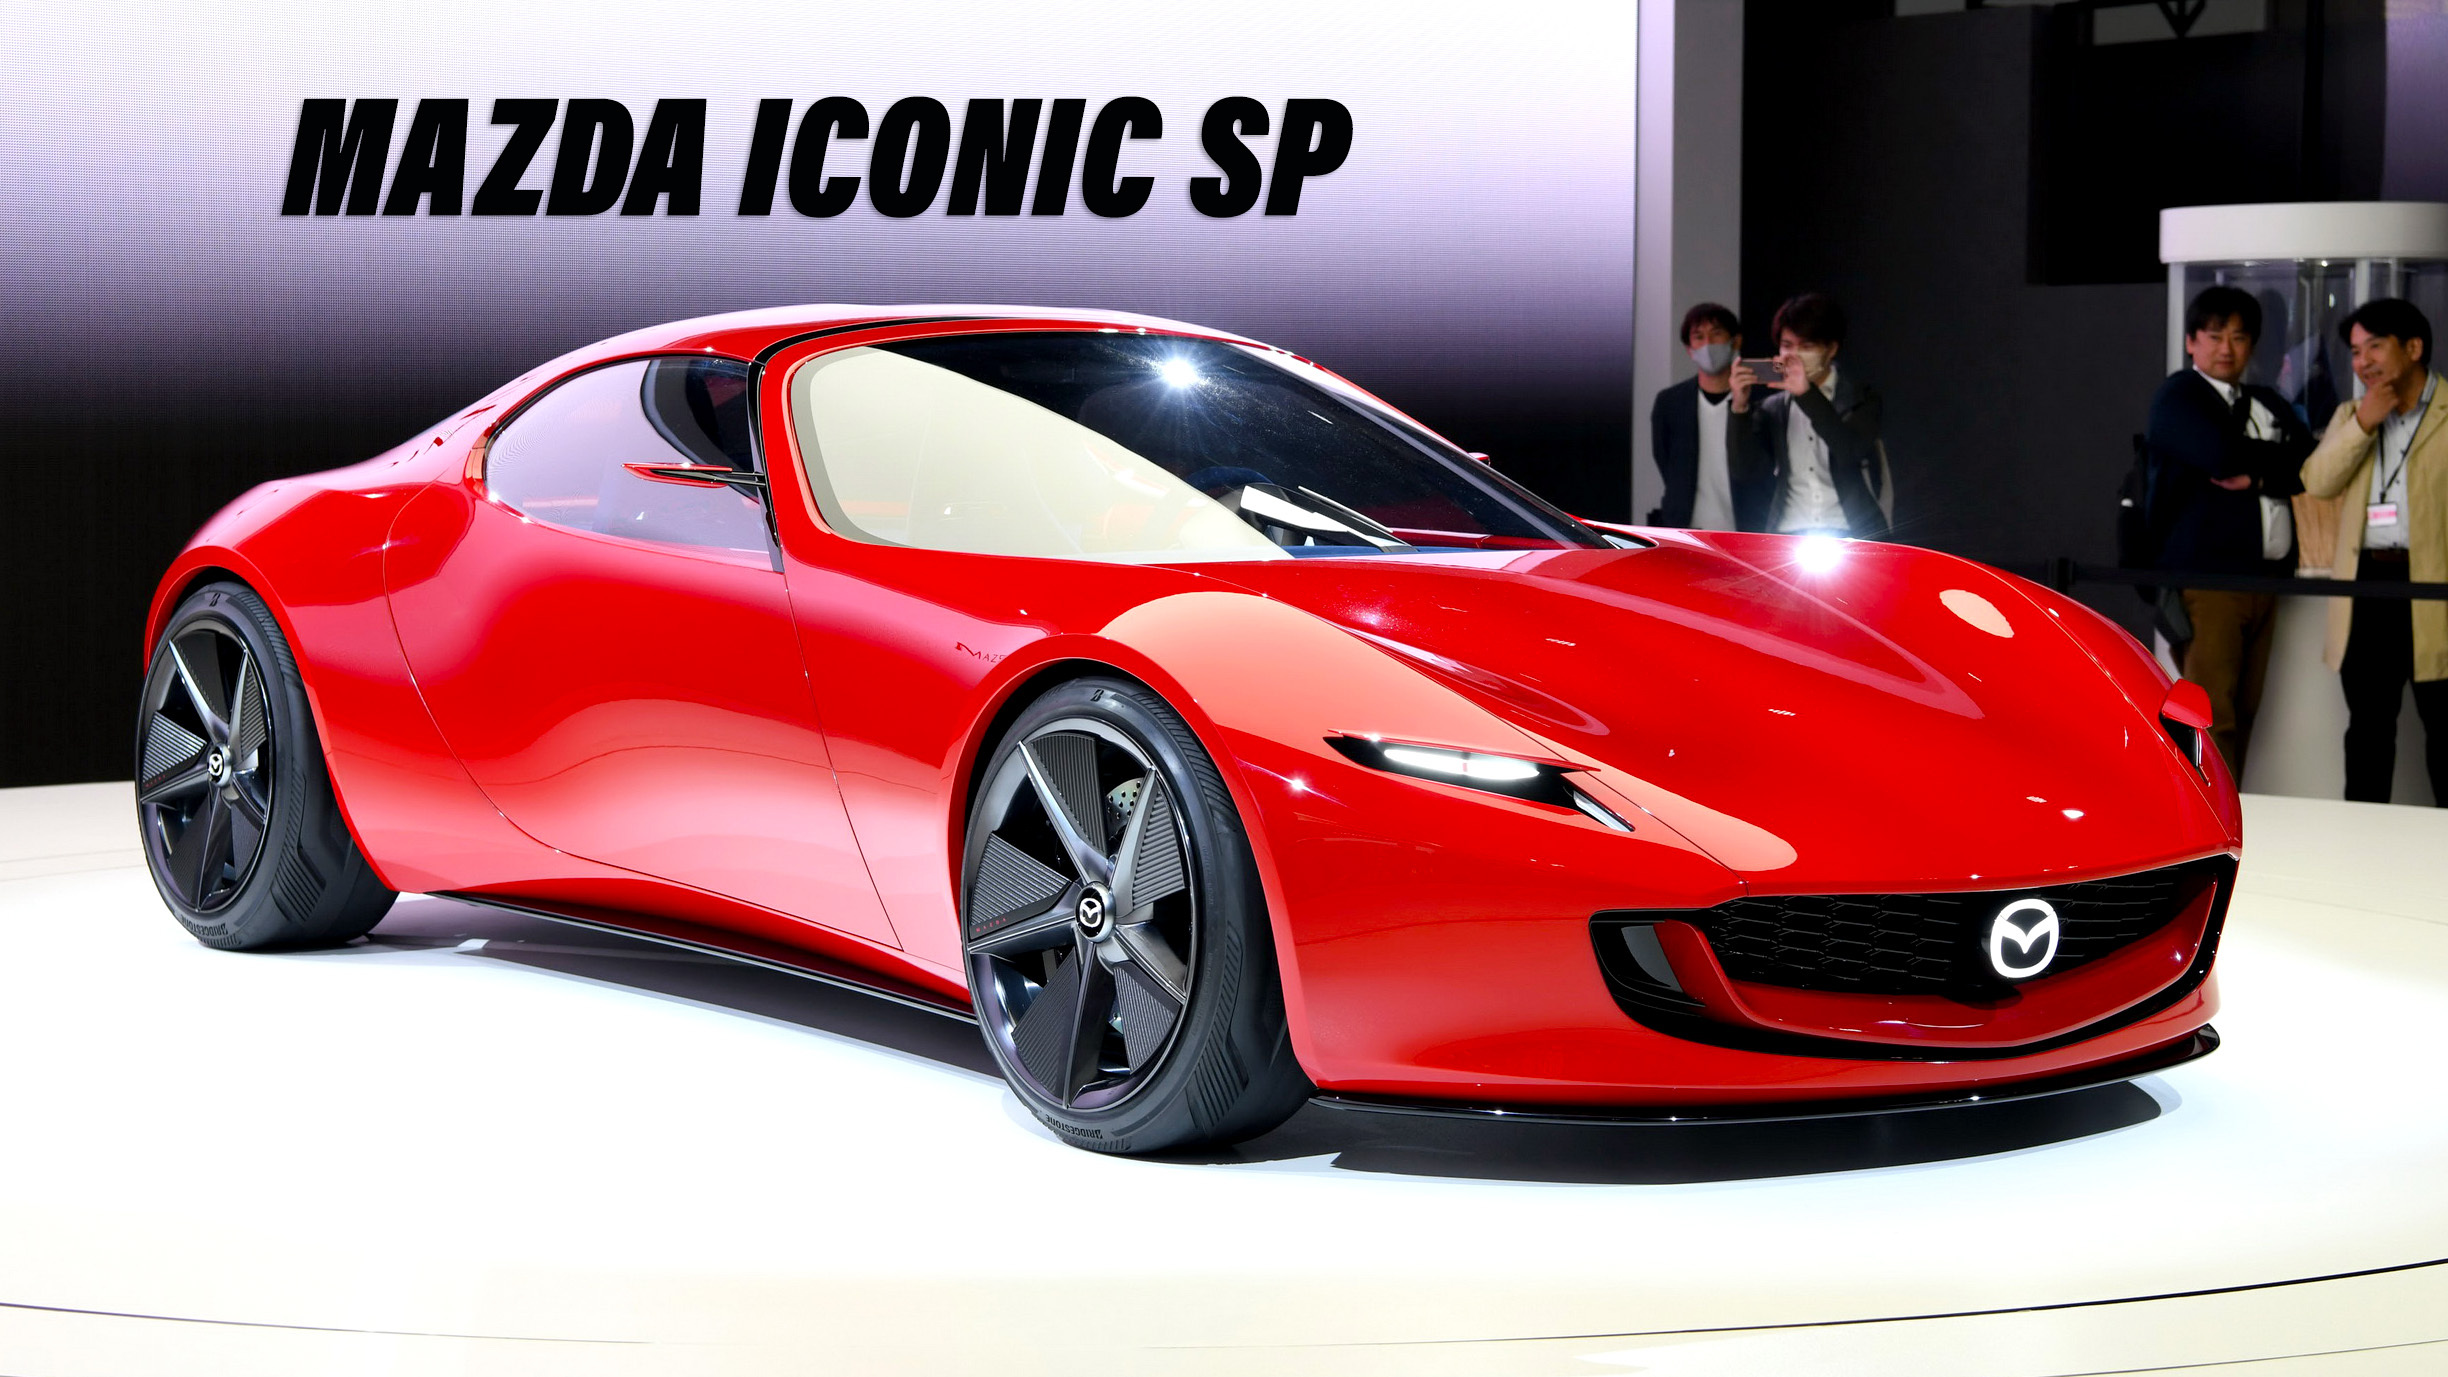 Mazda Says Rotary-Powered Iconic SP Concept Could Be Shrunk Down